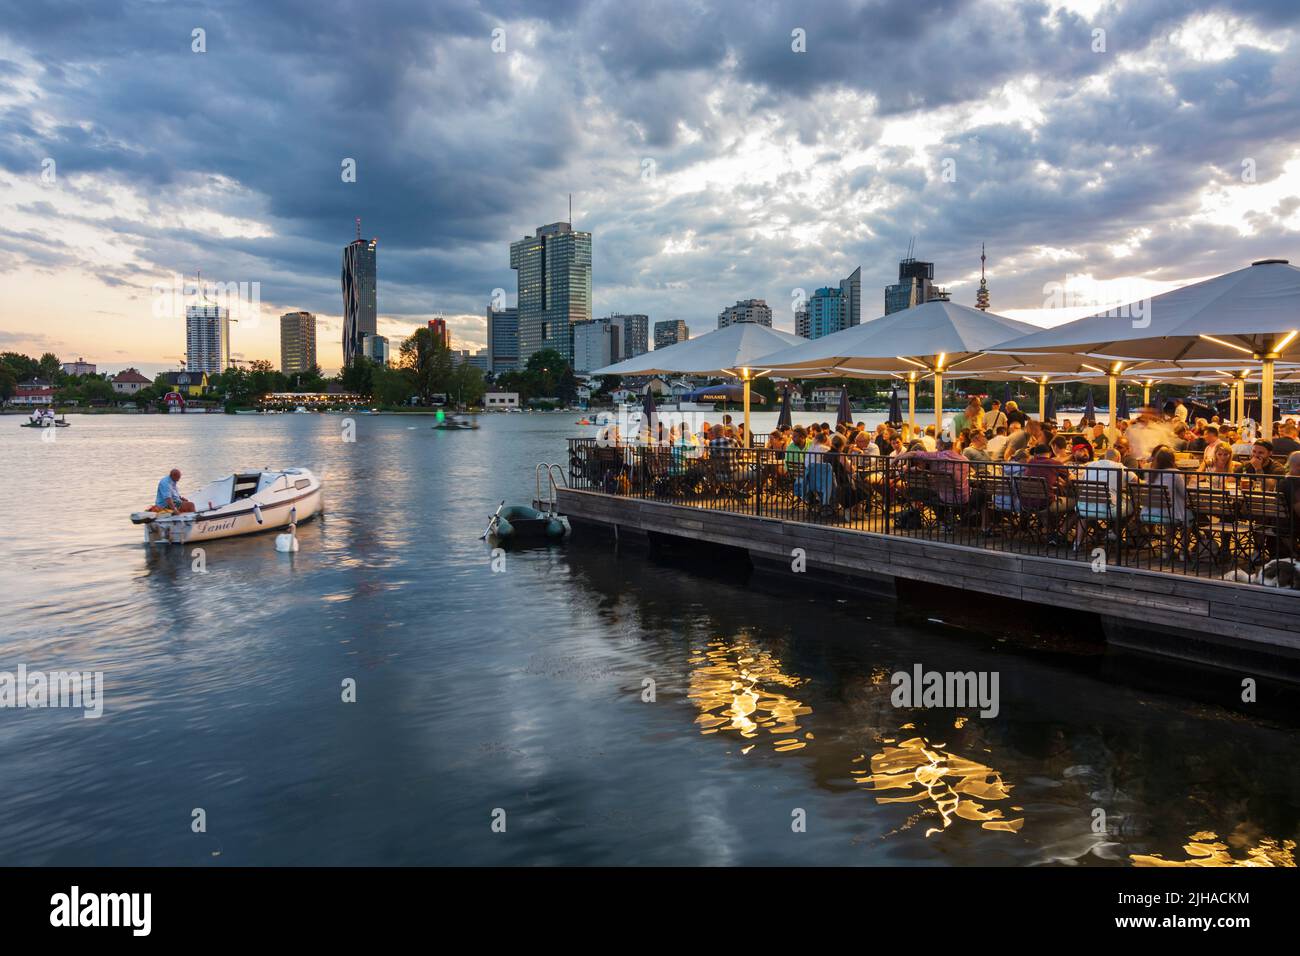 Wien, Vienna: oxbow lake Alte Donau (Old Danube), sunset, floating restaurant Strandcafe, Donaucity with DC Tower 1 and IZD Tower, Donauturm (Danube T Stock Photo